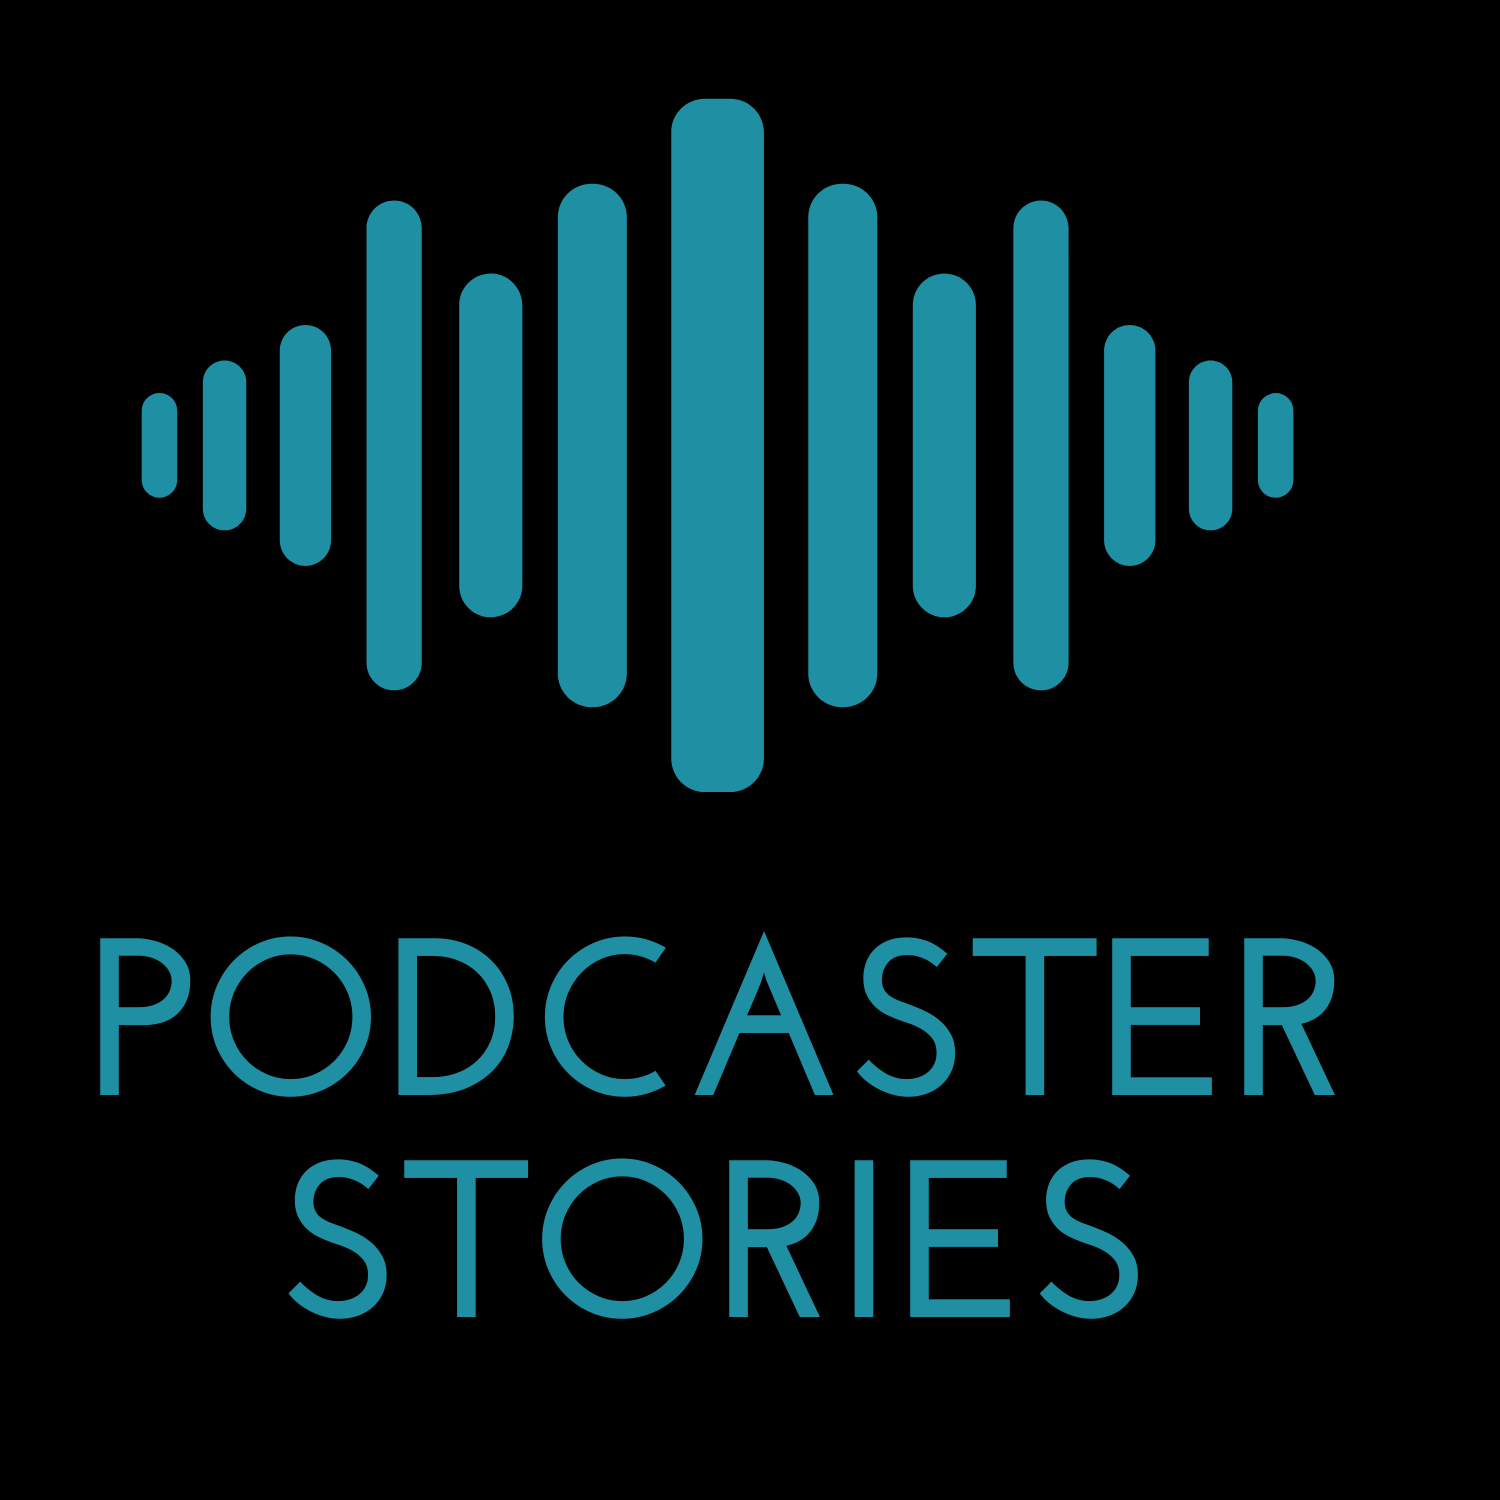 Podcaster Stories | SquadCast.fm Podcast Recording Software